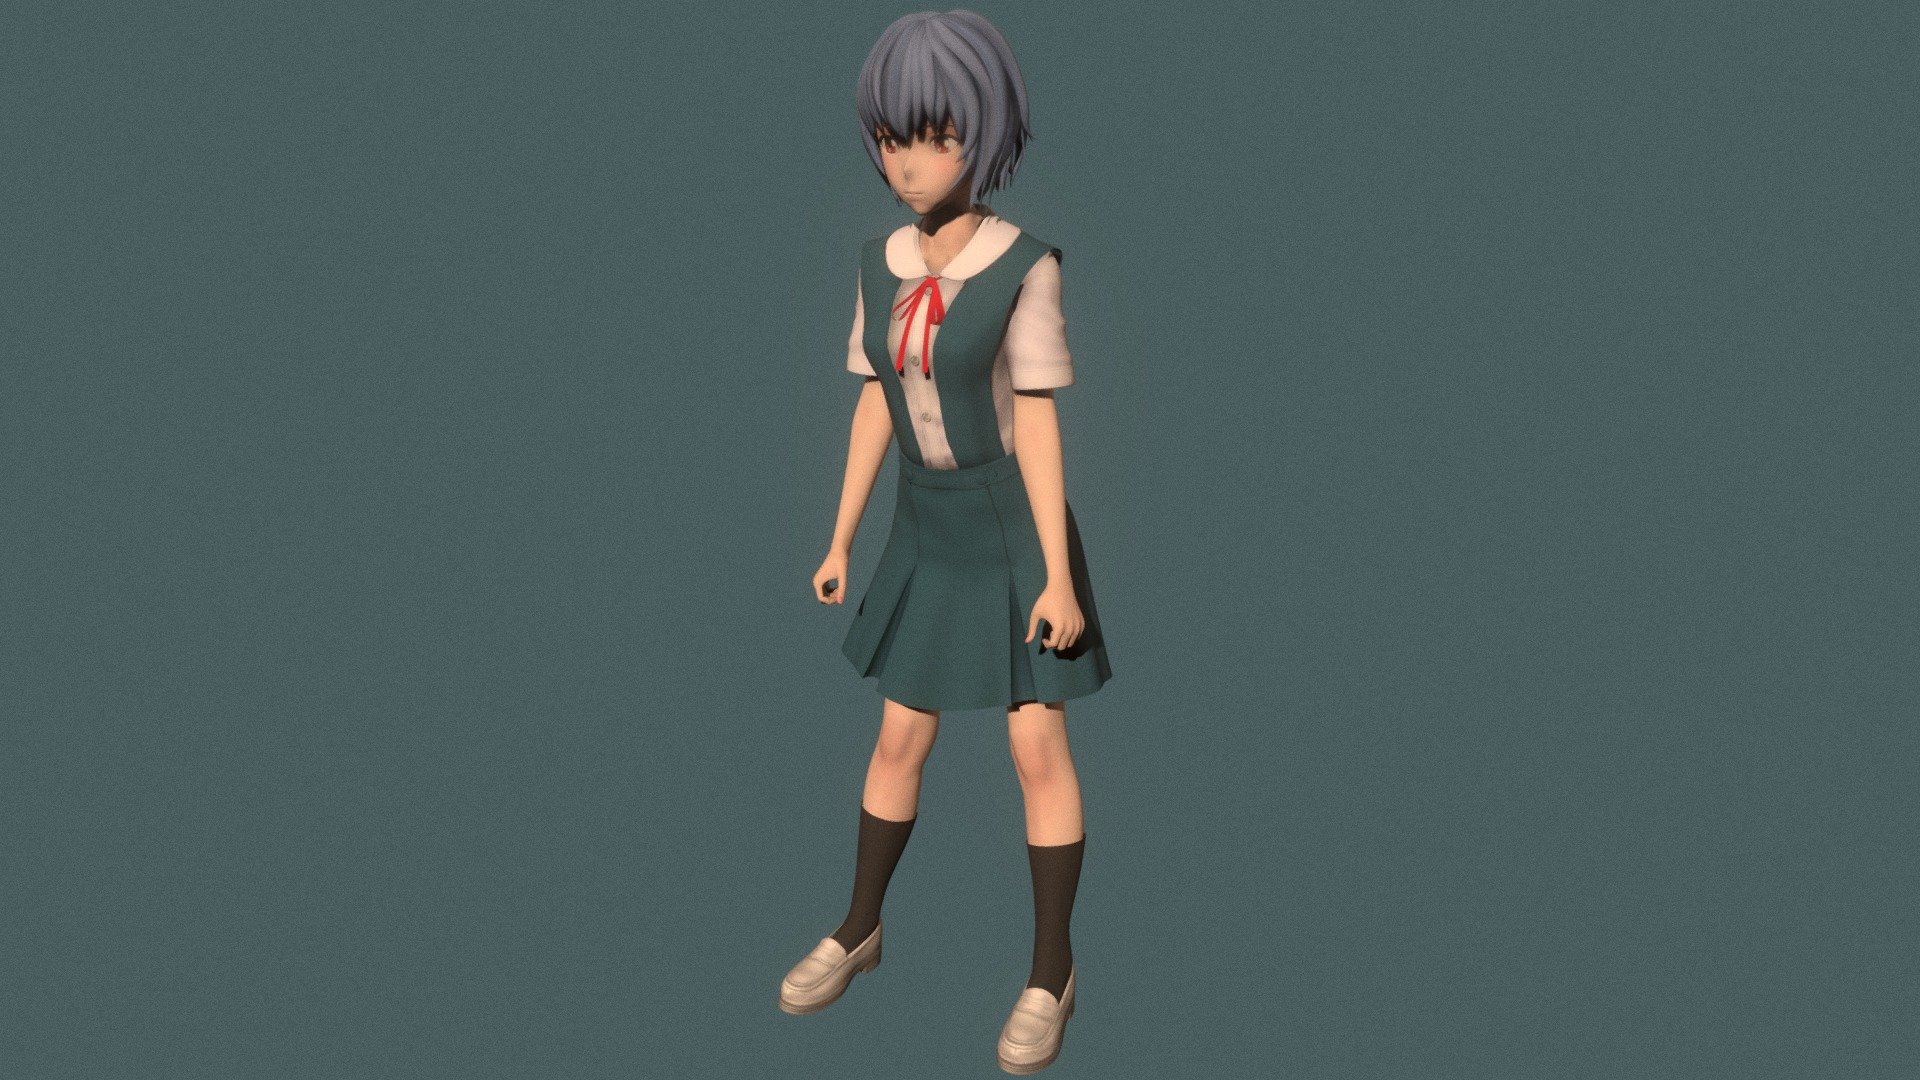 Posed model of anime girl Rei Ayanami (Neon Genesis Evangelion).

This product include .FBX (ver. 7200) and .MAX (ver. 2010) files.

Rigged version: https://sketchfab.com/3d-models/t-pose-rigged-model-of-rei-ayanami-1dd3693e44274b7391a72c6e47daacdb

I support convert this 3D model to various file formats: 3DS; AI; ASE; DAE; DWF; DWG; DXF; FLT; HTR; IGS; M3G; MQO; OBJ; SAT; STL; W3D; WRL; X.

You can buy all of my models in one pack to save cost: https://sketchfab.com/3d-models/all-of-my-anime-girls-c5a56156994e4193b9e8fa21a3b8360b

And I can make commission models.

If you have any questions, please leave a comment or contact me via my email 3d.eden.project@gmail.com 3d model